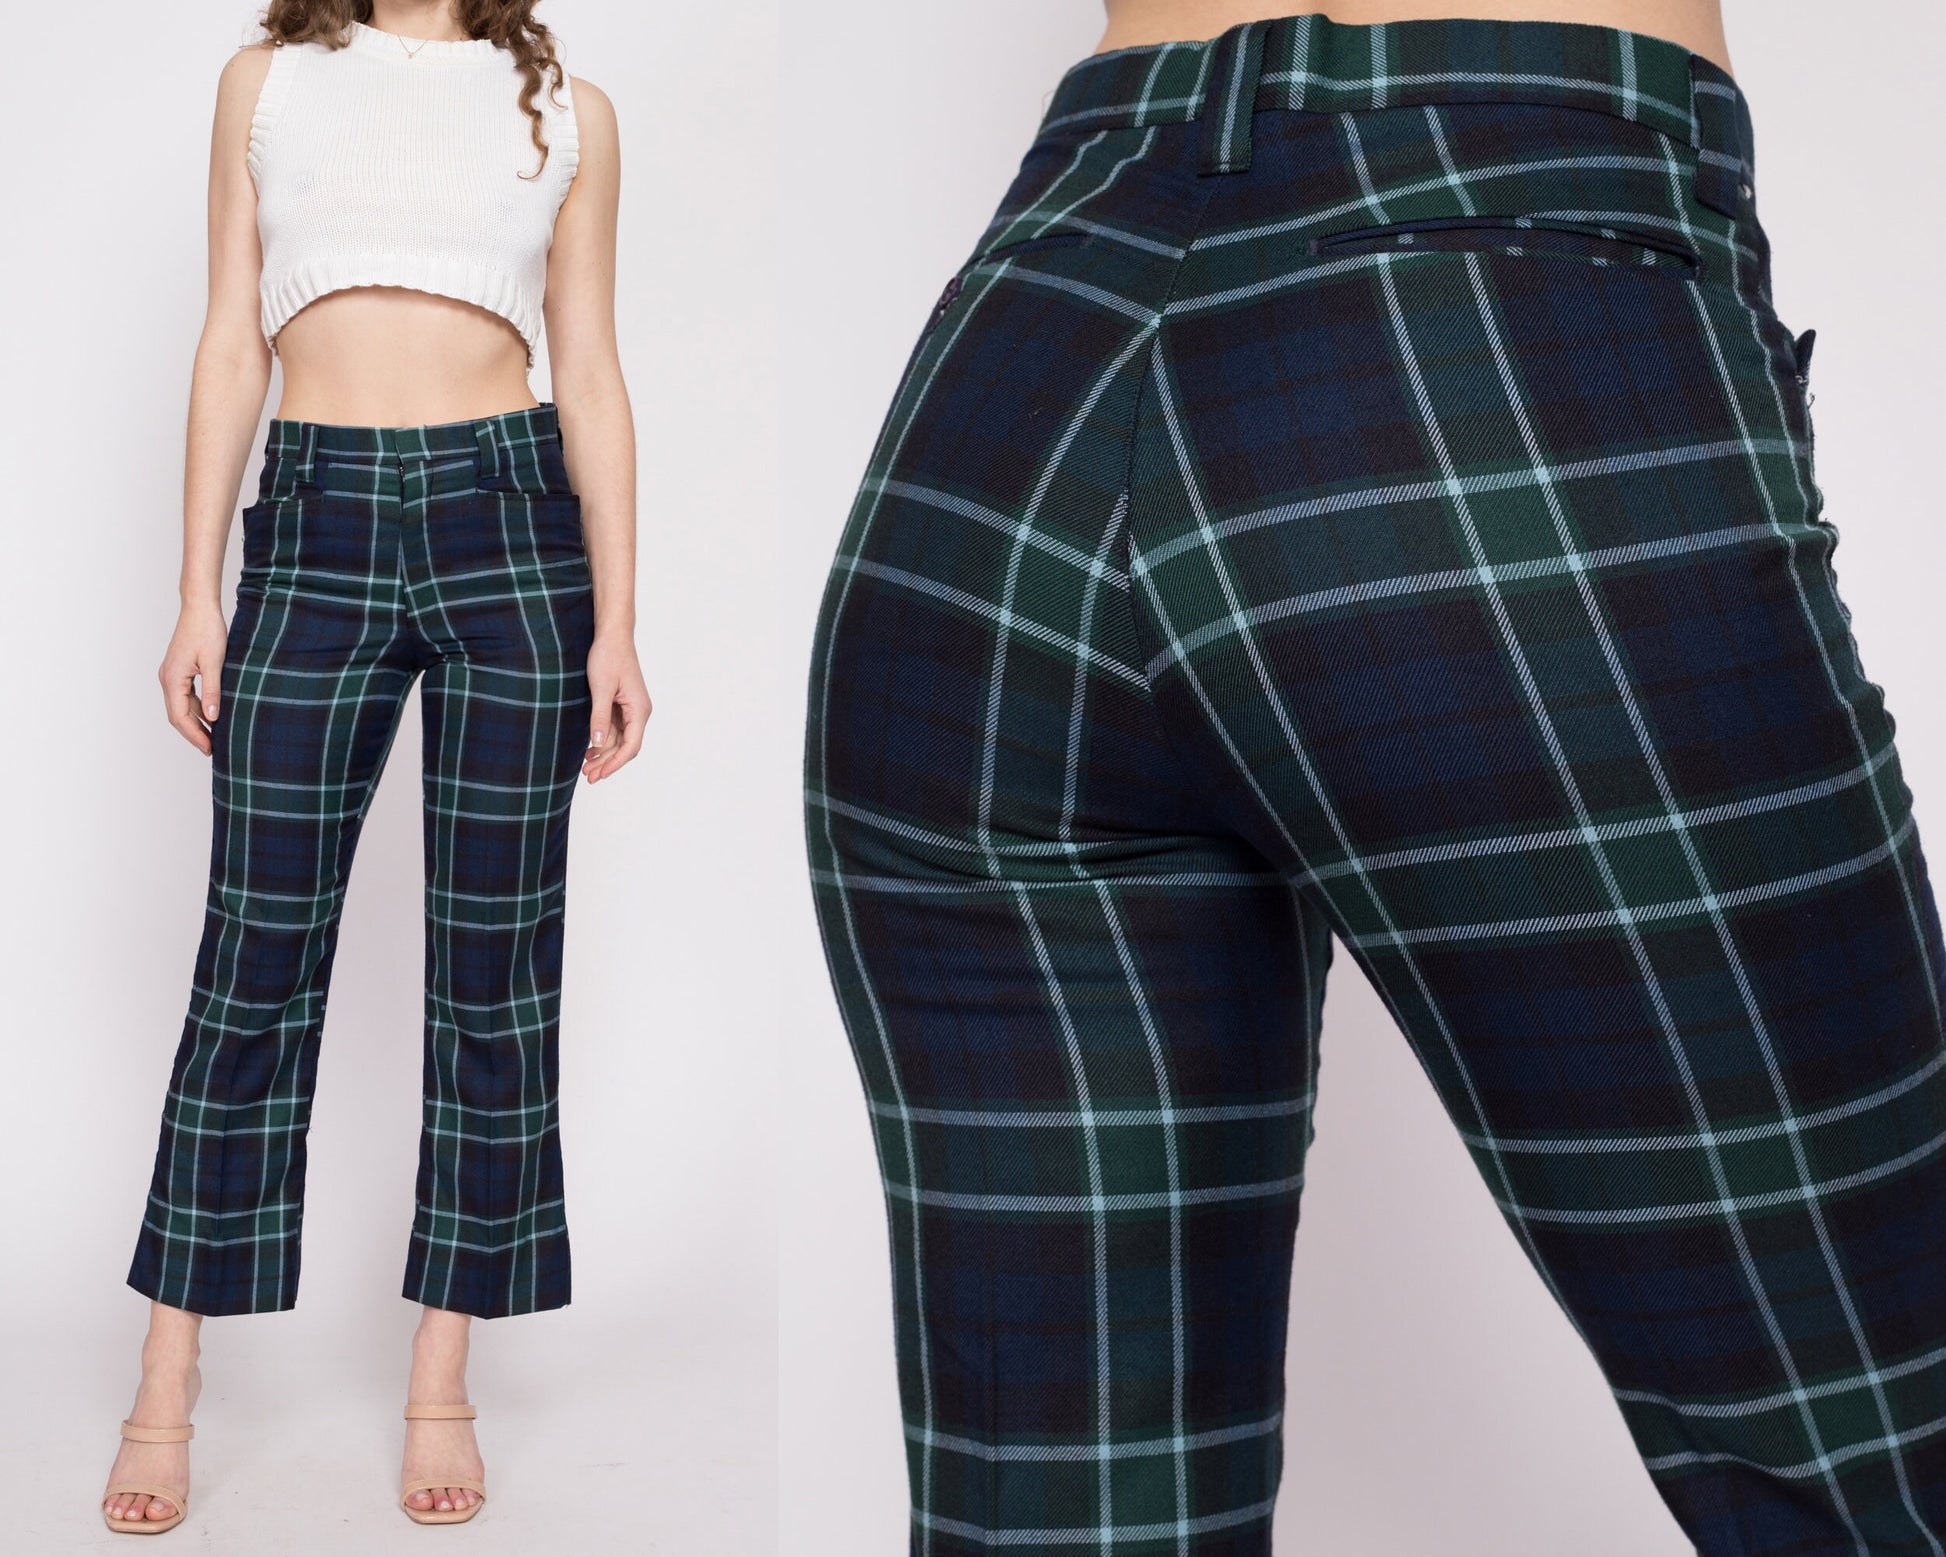 Retro Plaid Flare Pants in Black and Turquoise